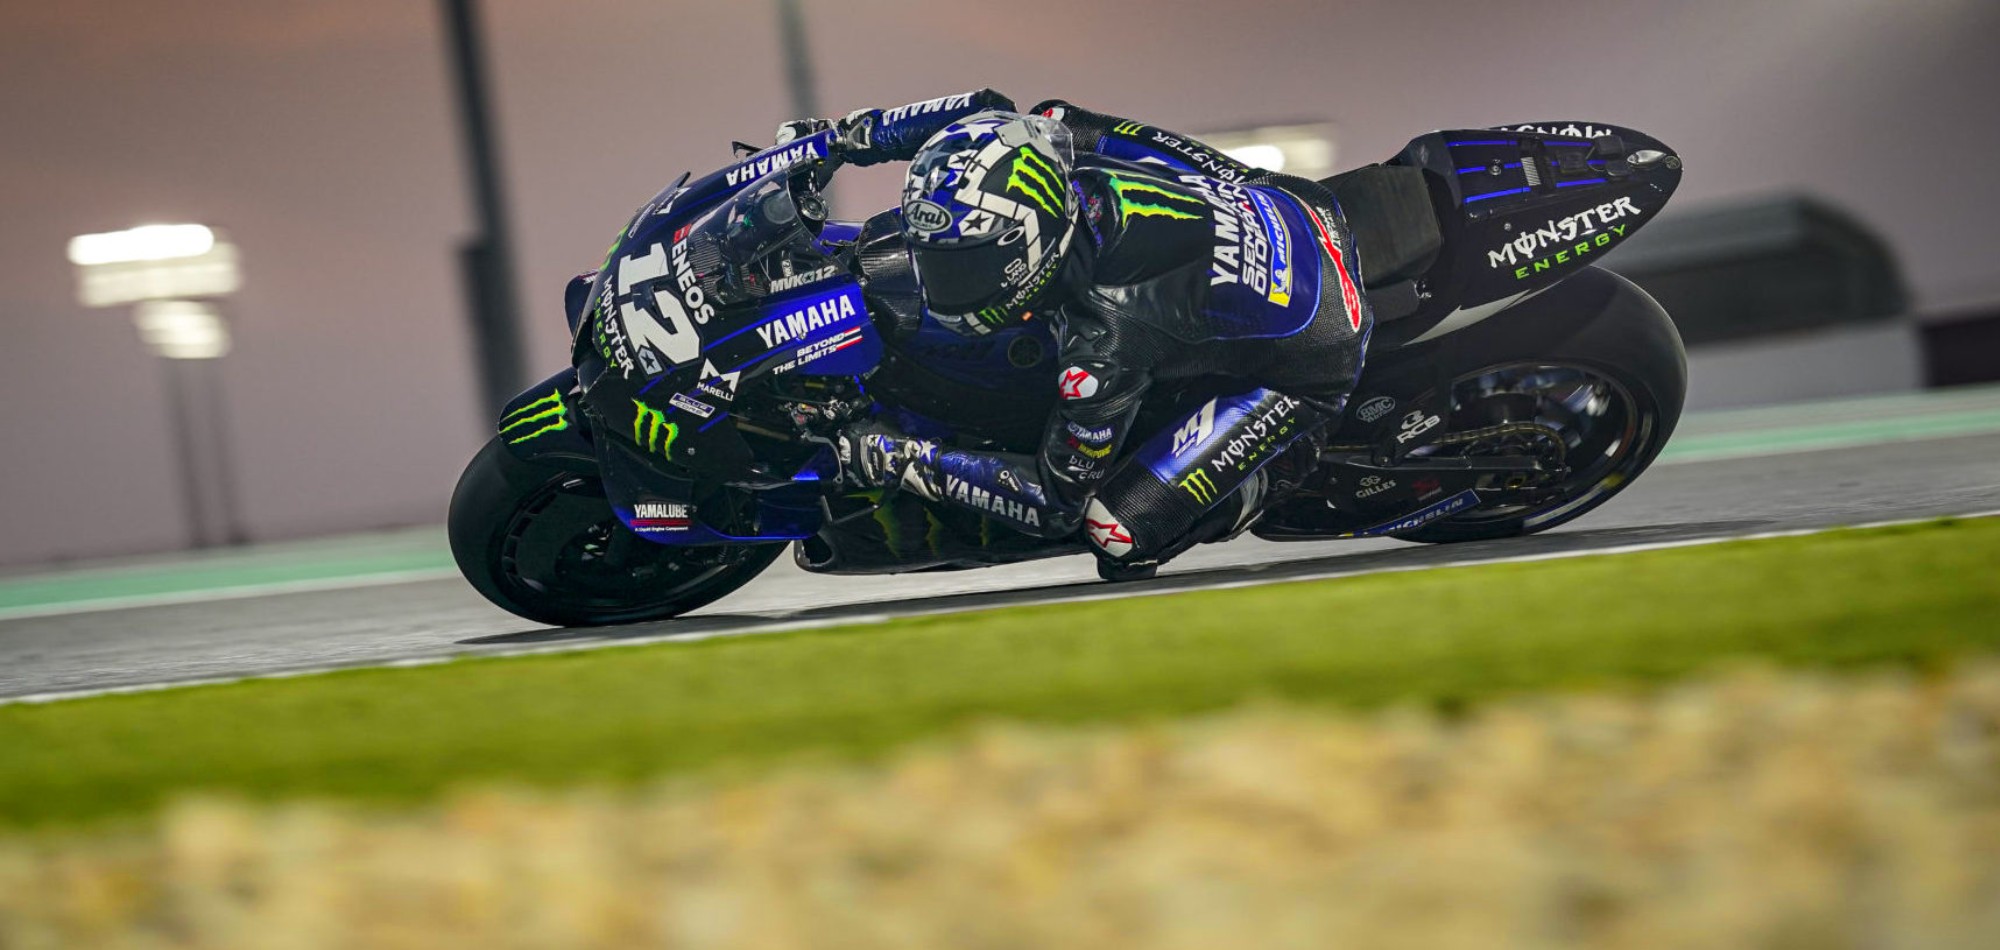 Spain’s Vinales ready to impress fans in Qatar